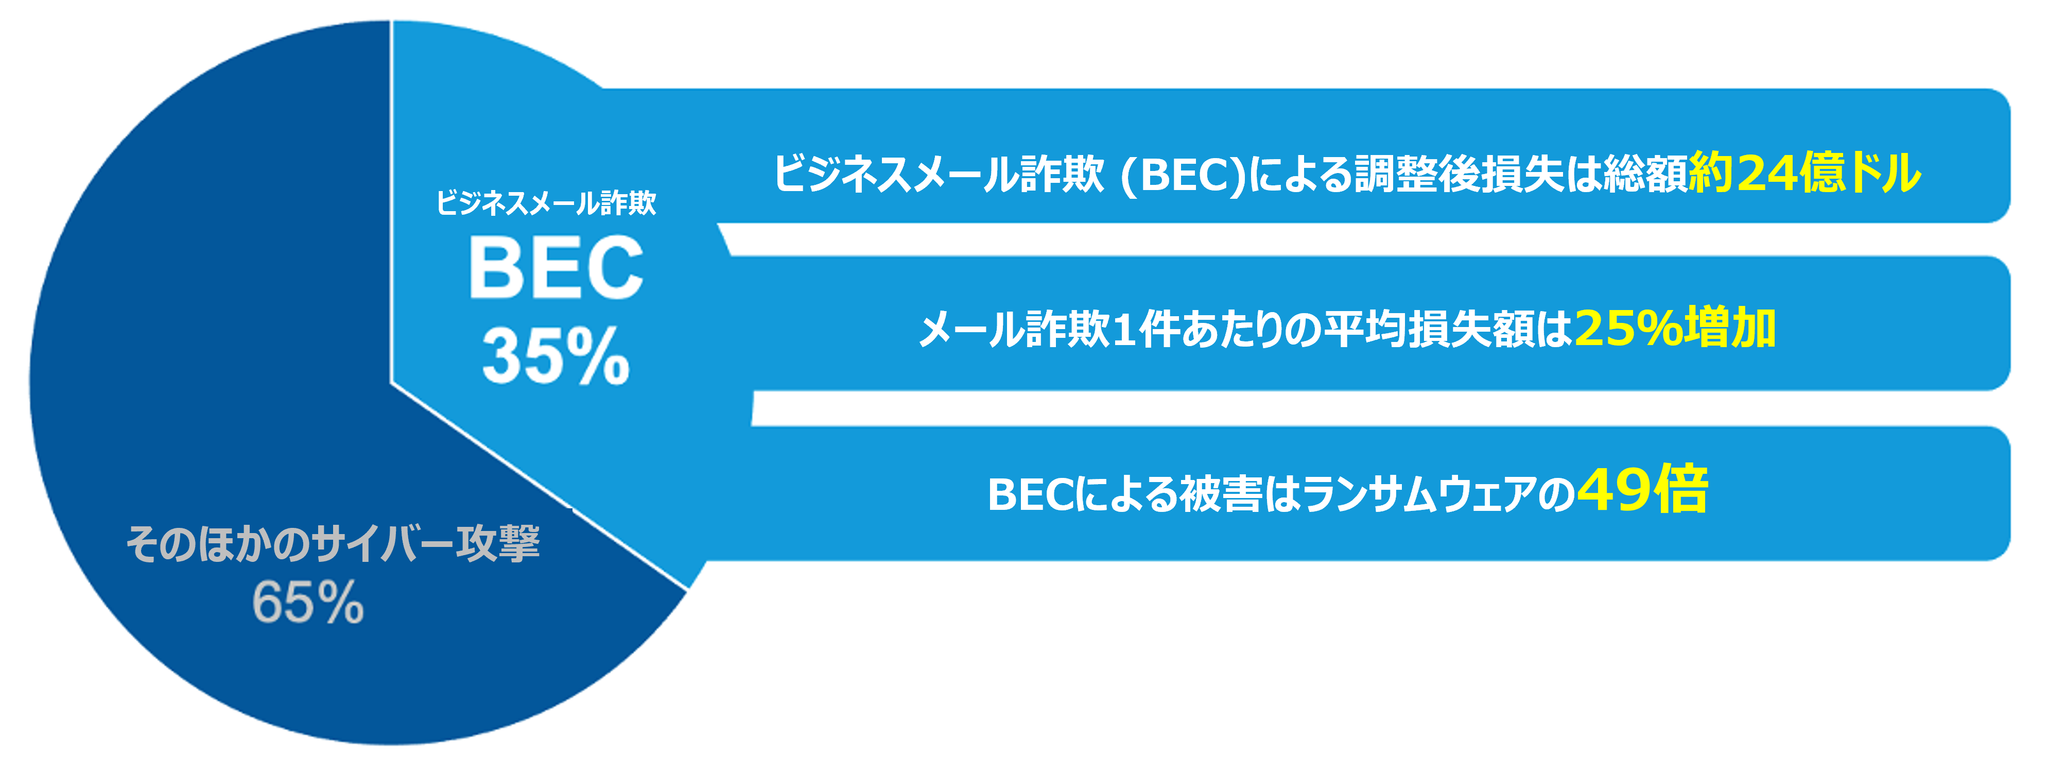 Proofpoint Blog 第12回 「FBIのIC3レポート:2021年、電子メール詐欺